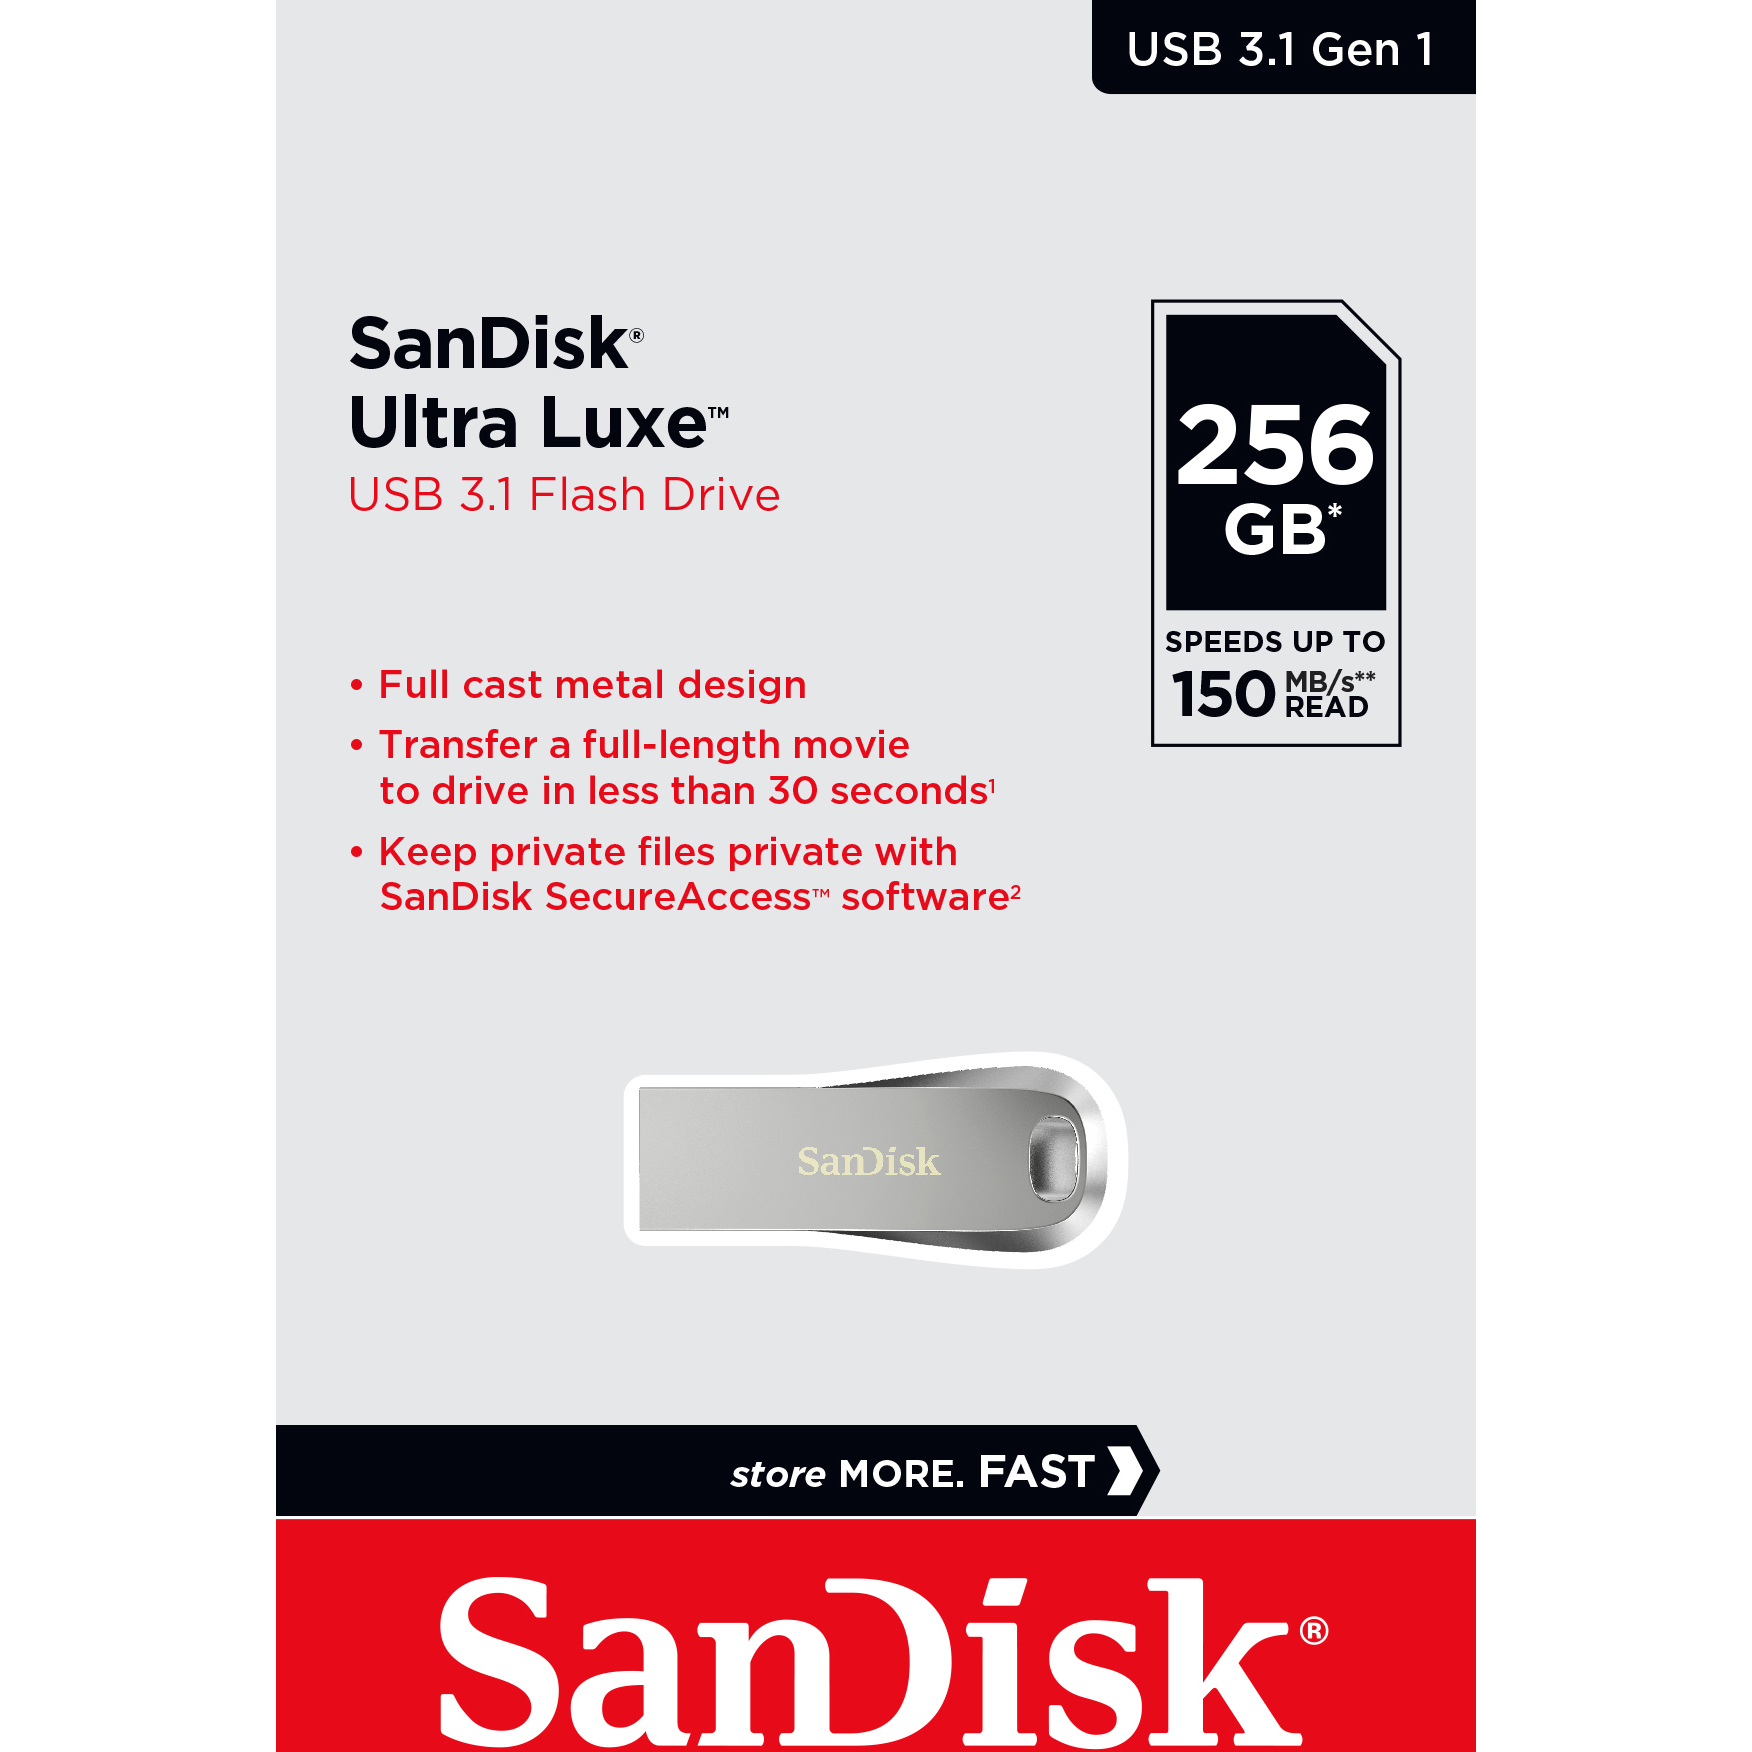 Original SanDisk Ultra Luxe 256GB Silver USB 3.1 Flash Drive (SDCZ74-256G-G46)